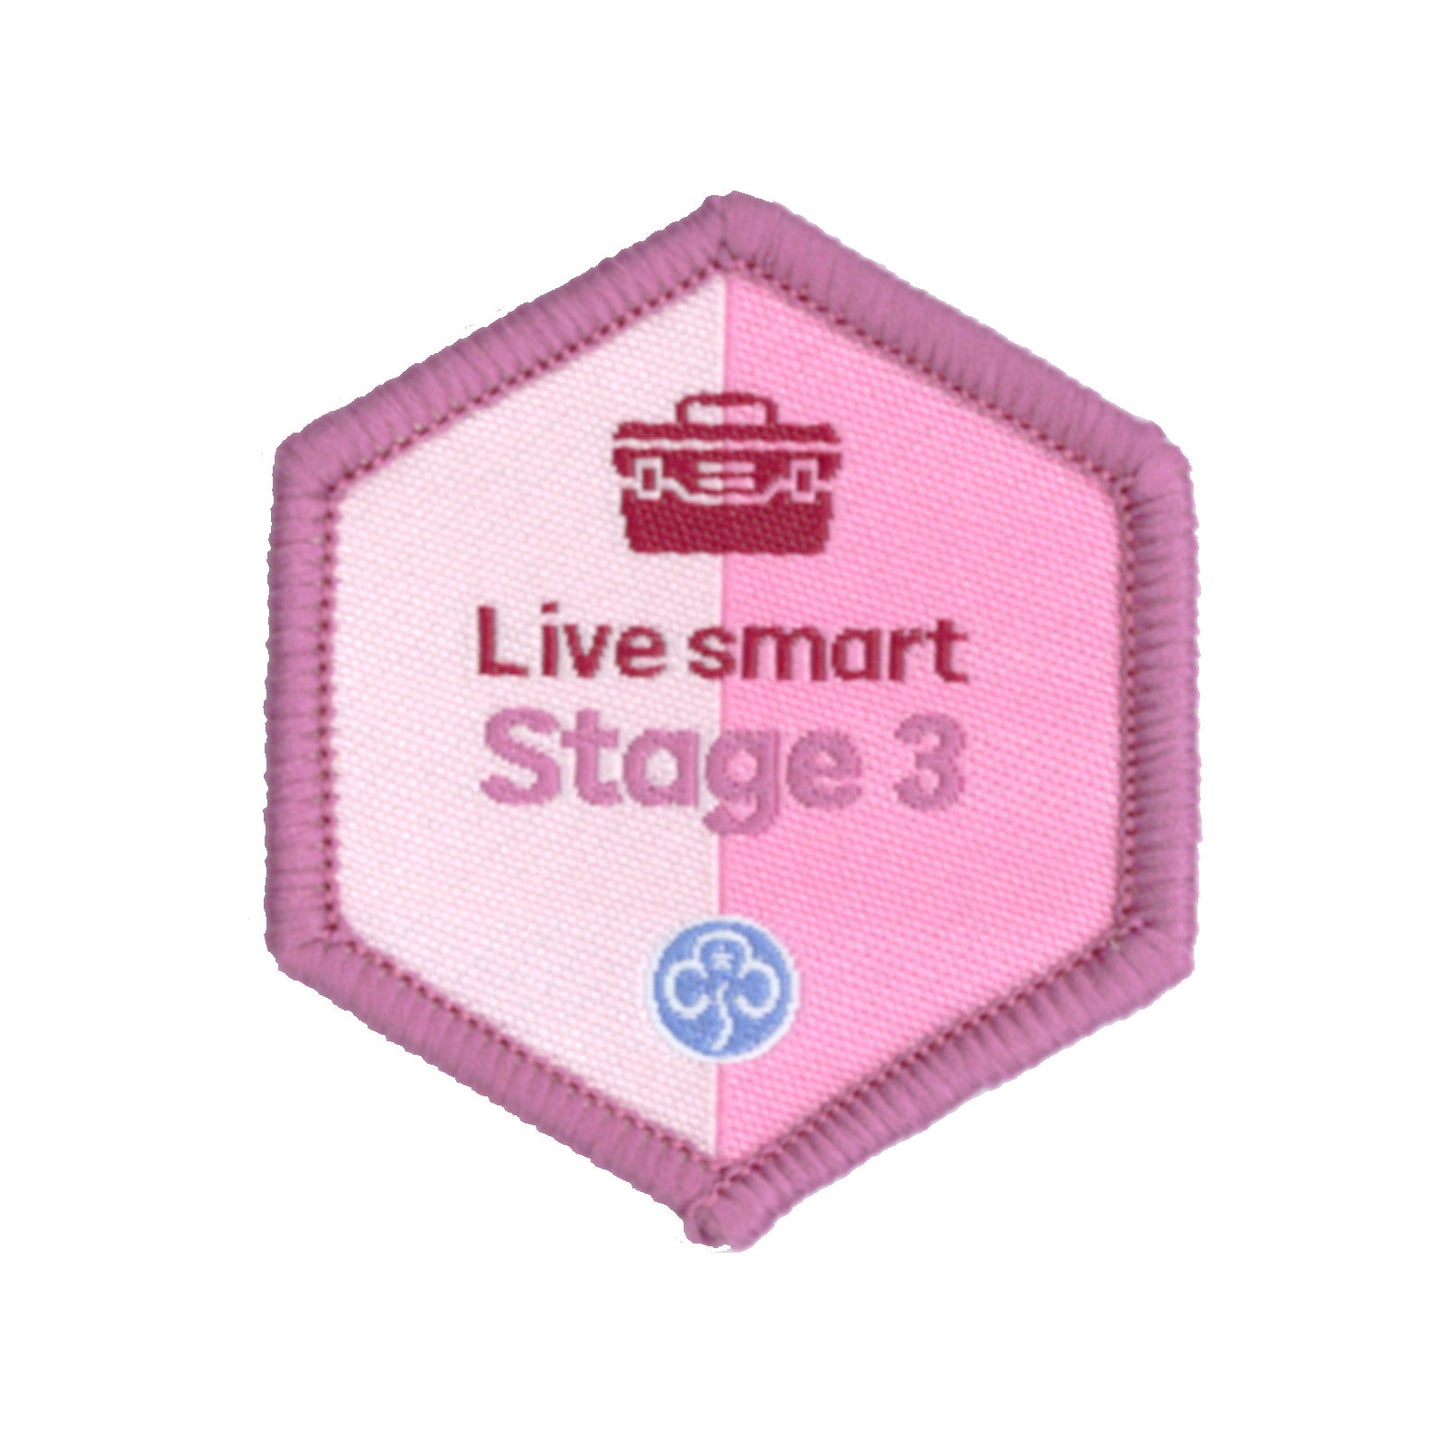 Skills Builder - Skills For My Future - Live Smart Stage 3 Woven Badge